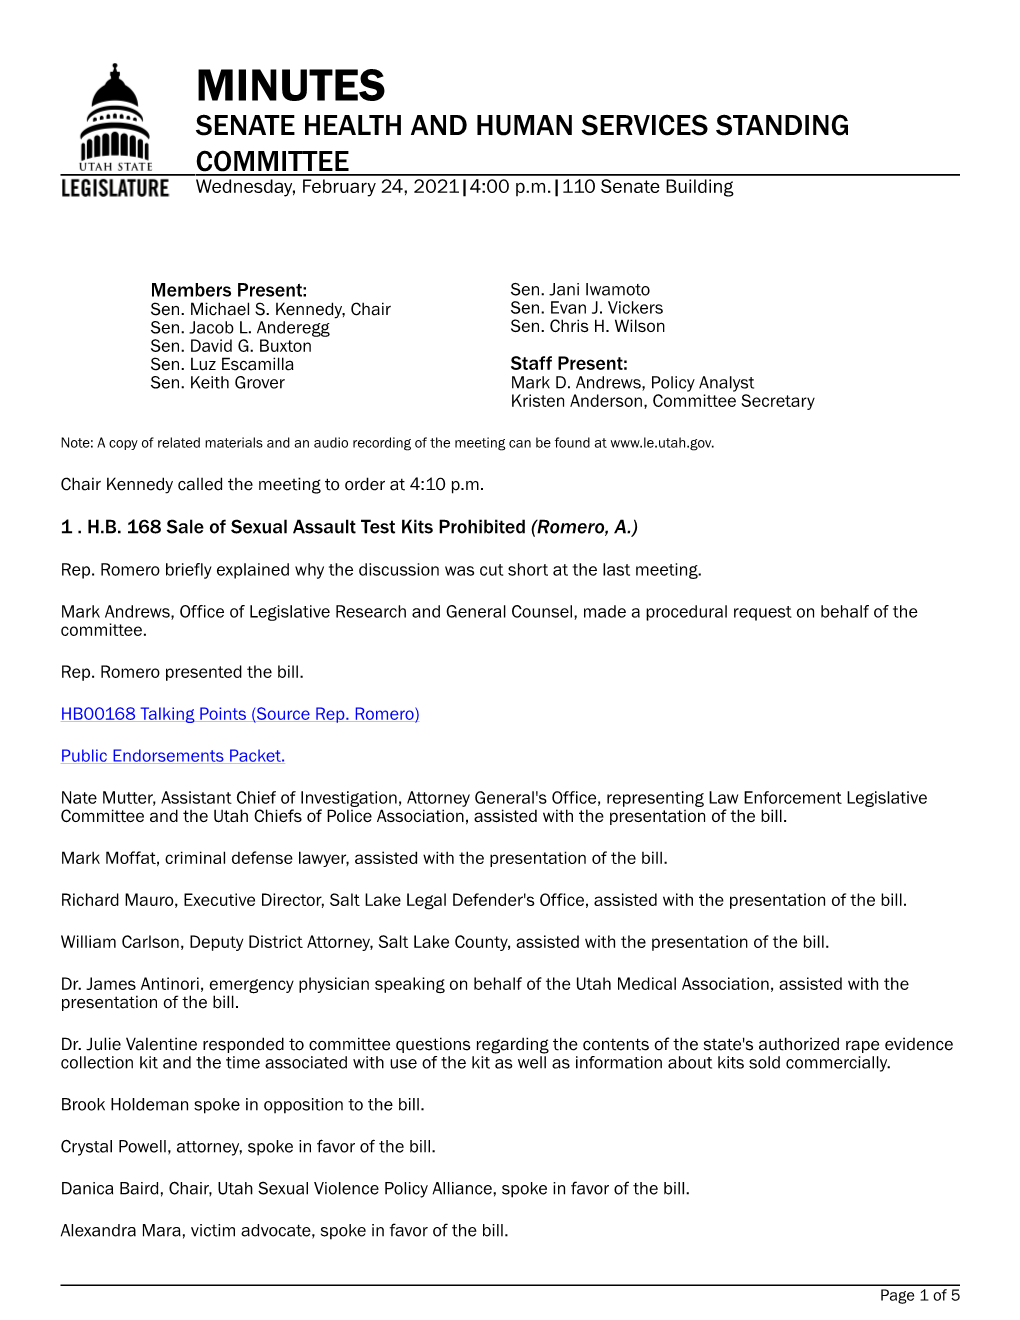 MINUTES SENATE HEALTH and HUMAN SERVICES STANDING COMMITTEE Wednesday, February 24, 2021|4:00 P.M.|110 Senate Building